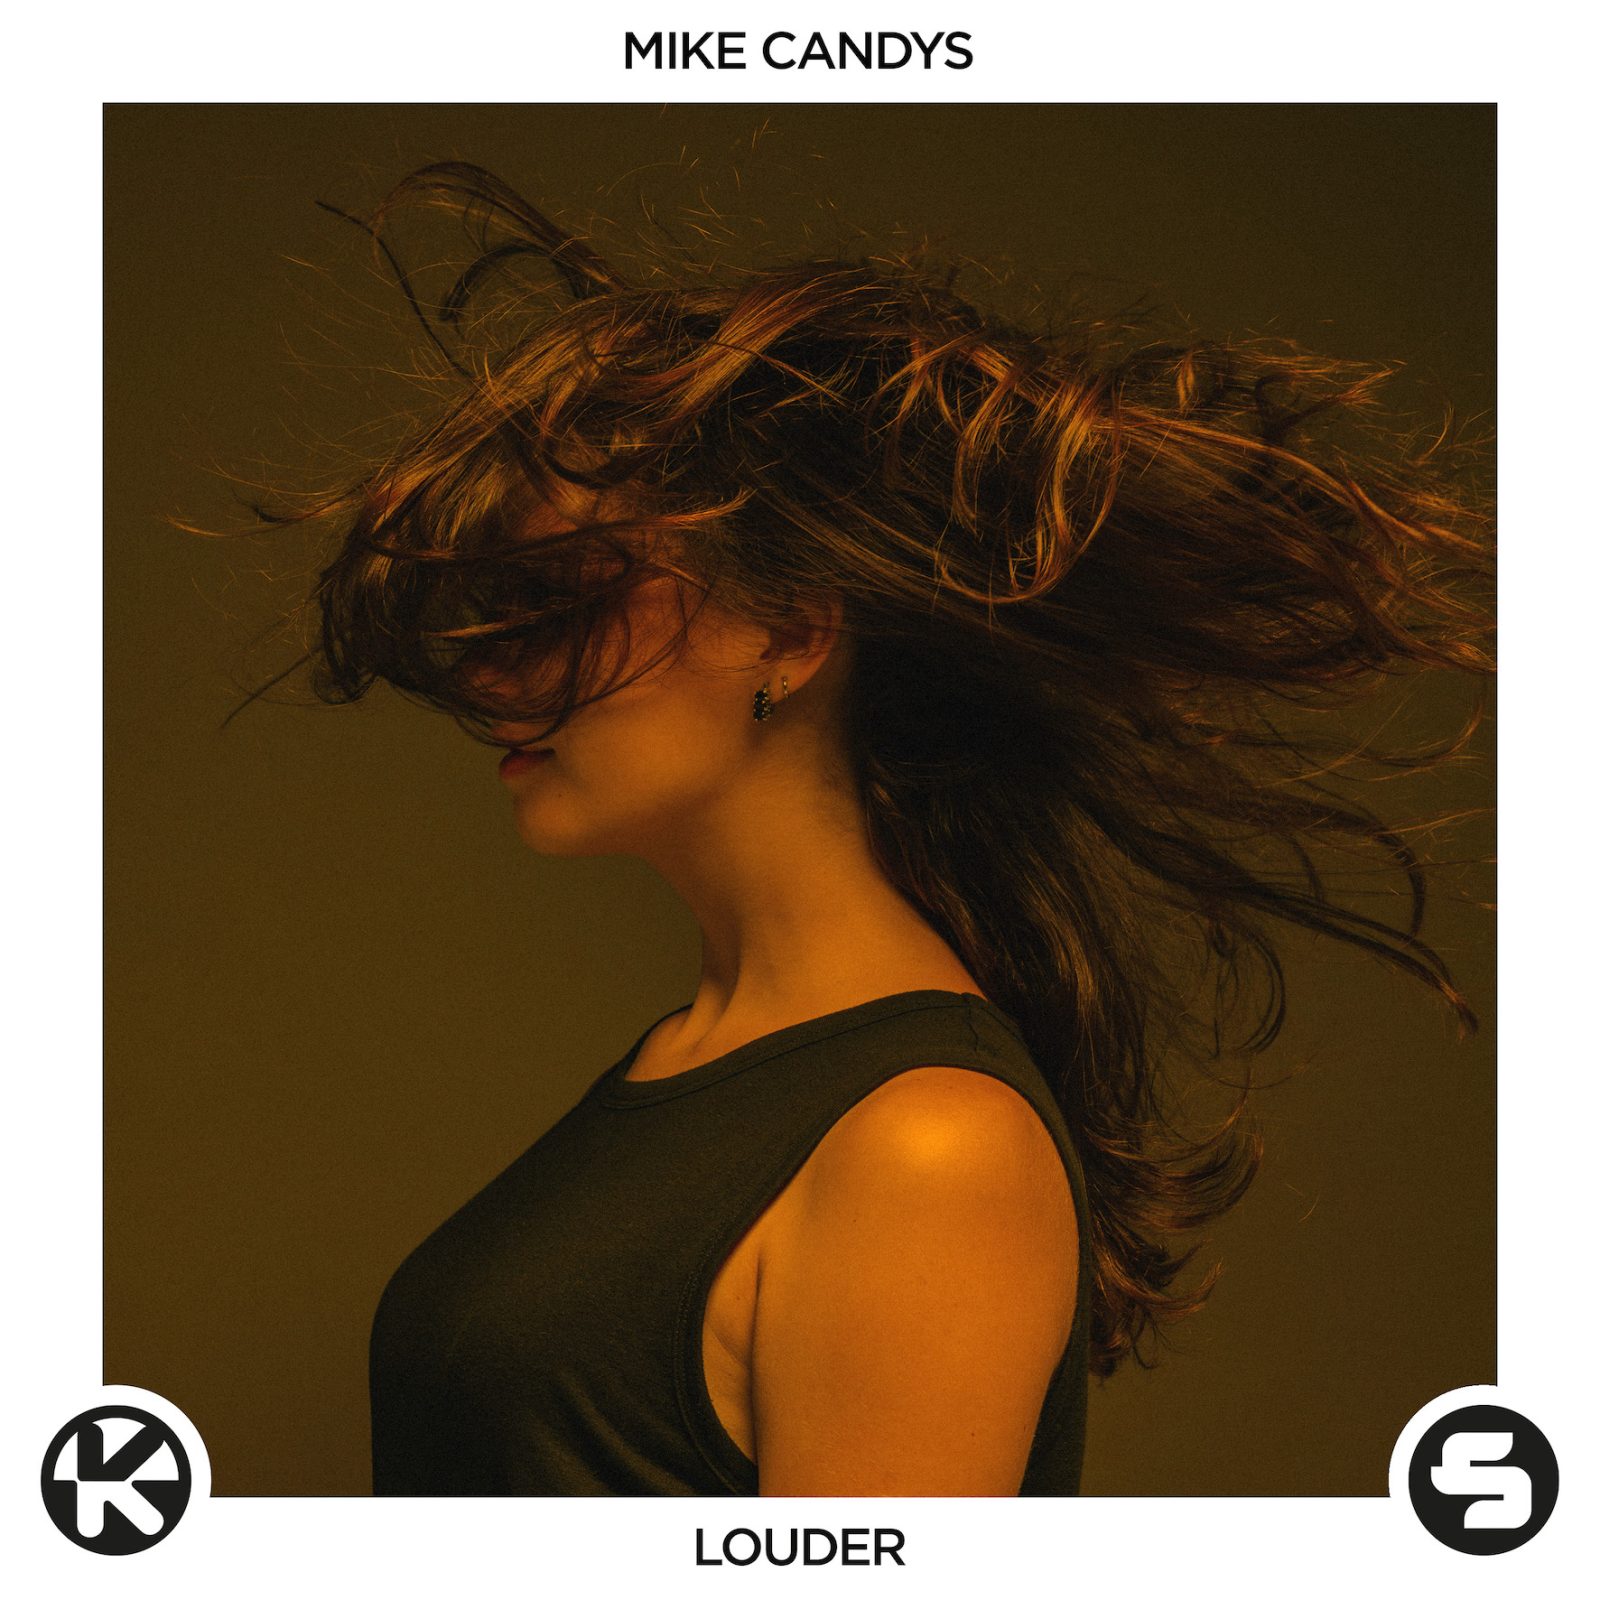 MIKE CANDYS "Louder"